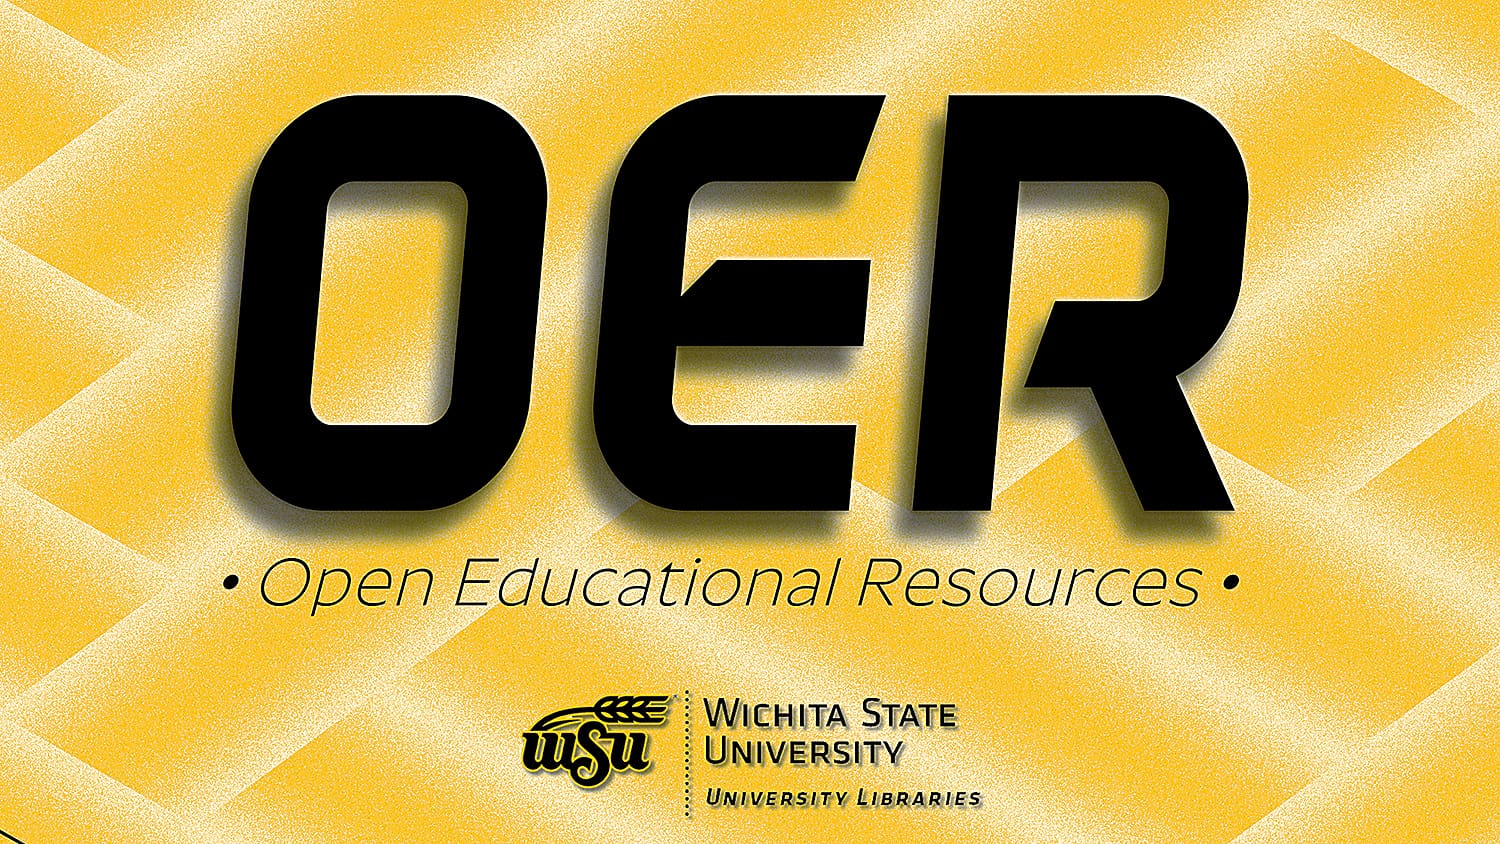 OER - Open Educational Resources. Wichita State University Libraries.